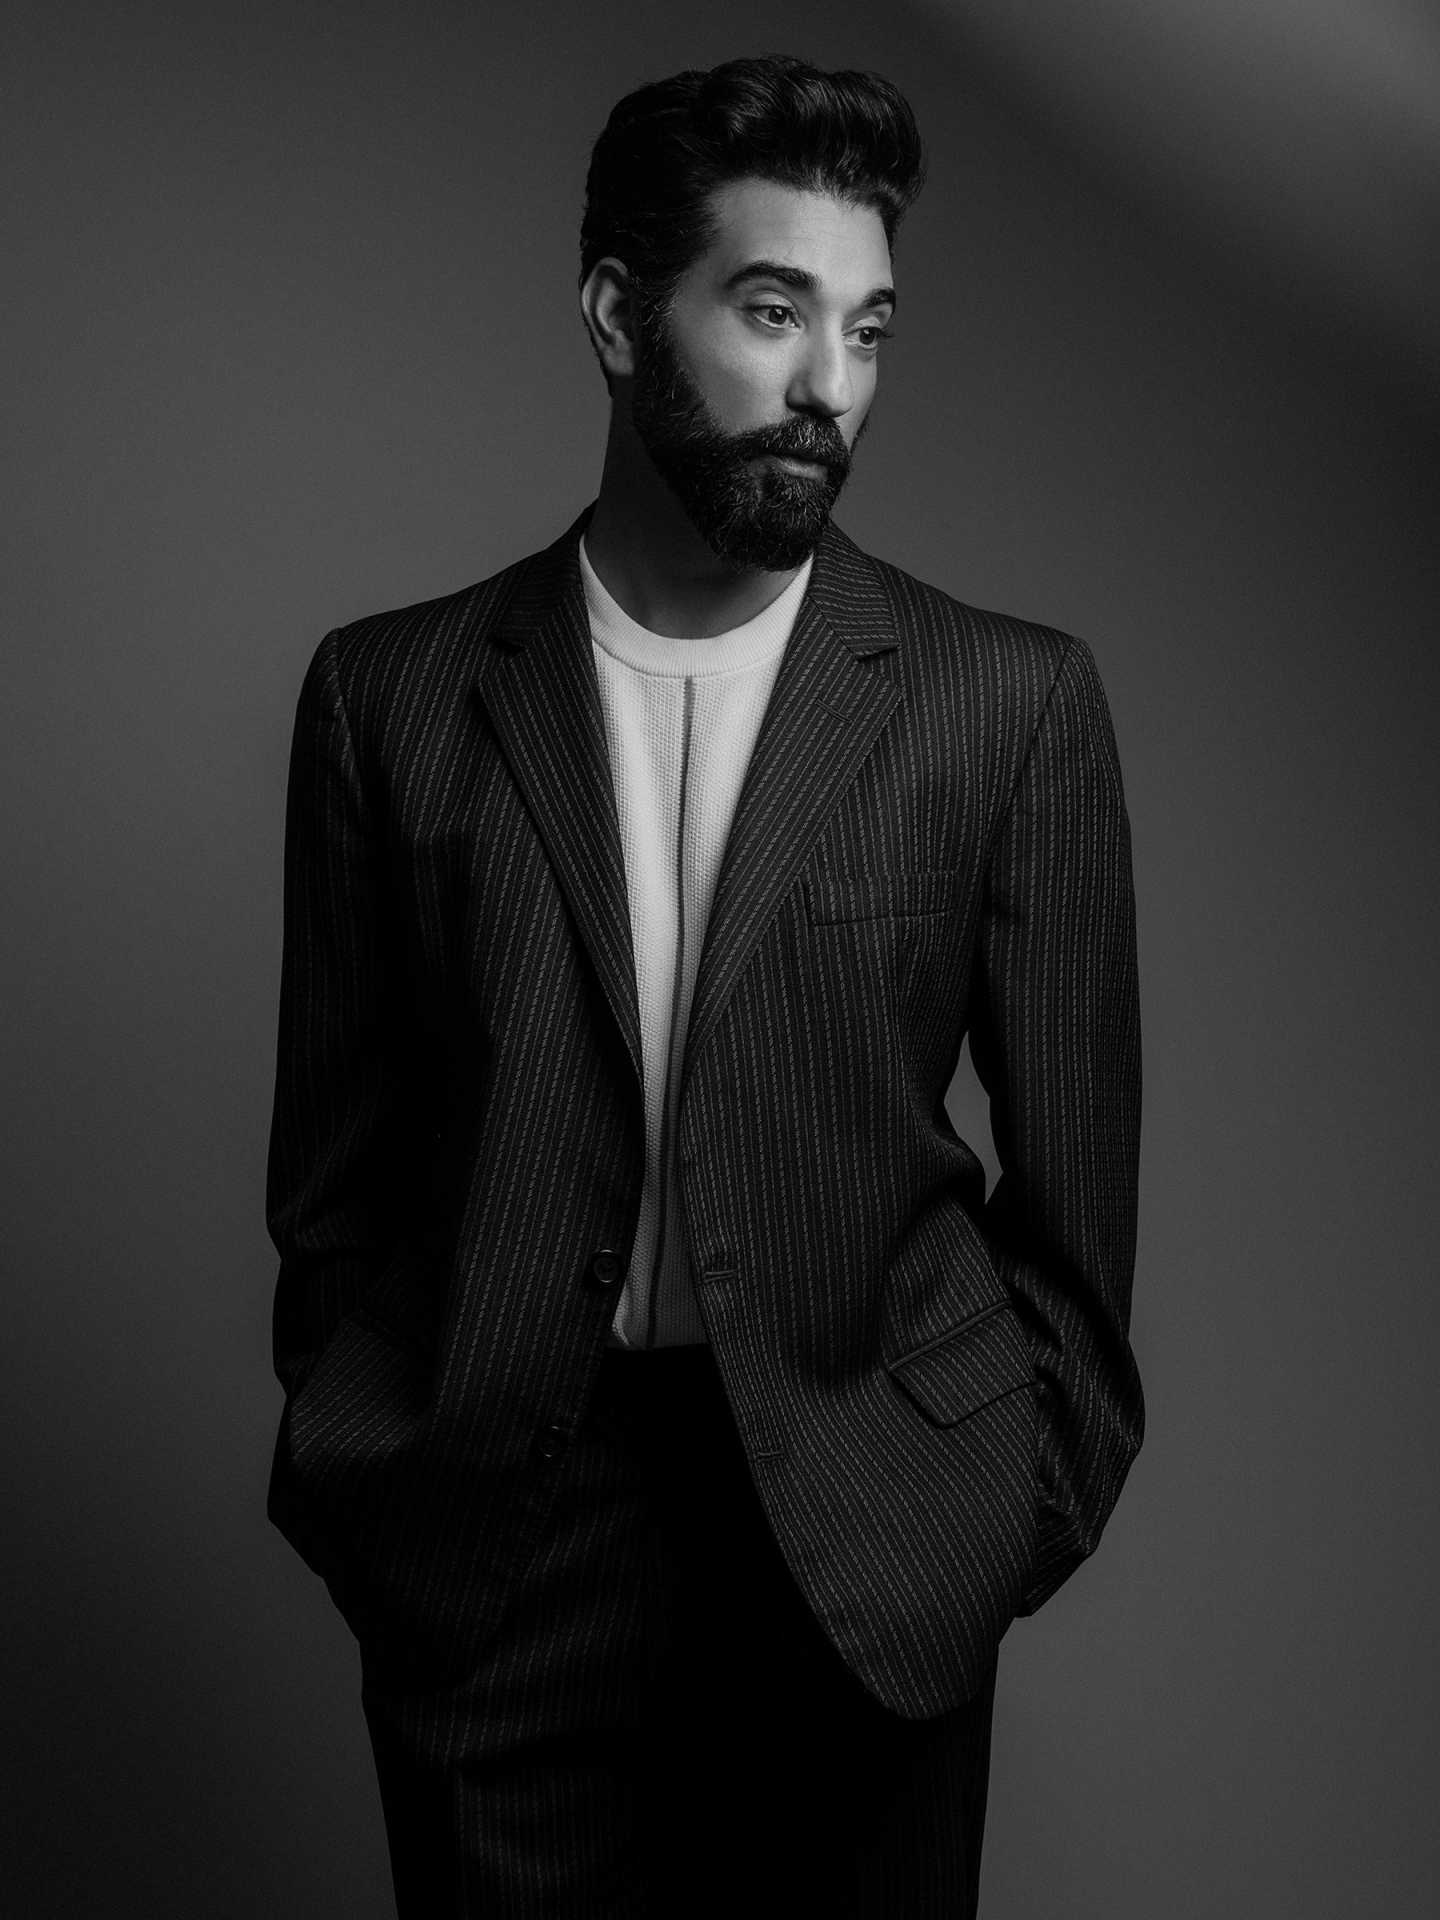 Photography and styling: Lefteris Primos | Hair and makeup: Lauren Griffin | Suit: Vintage Monsieur